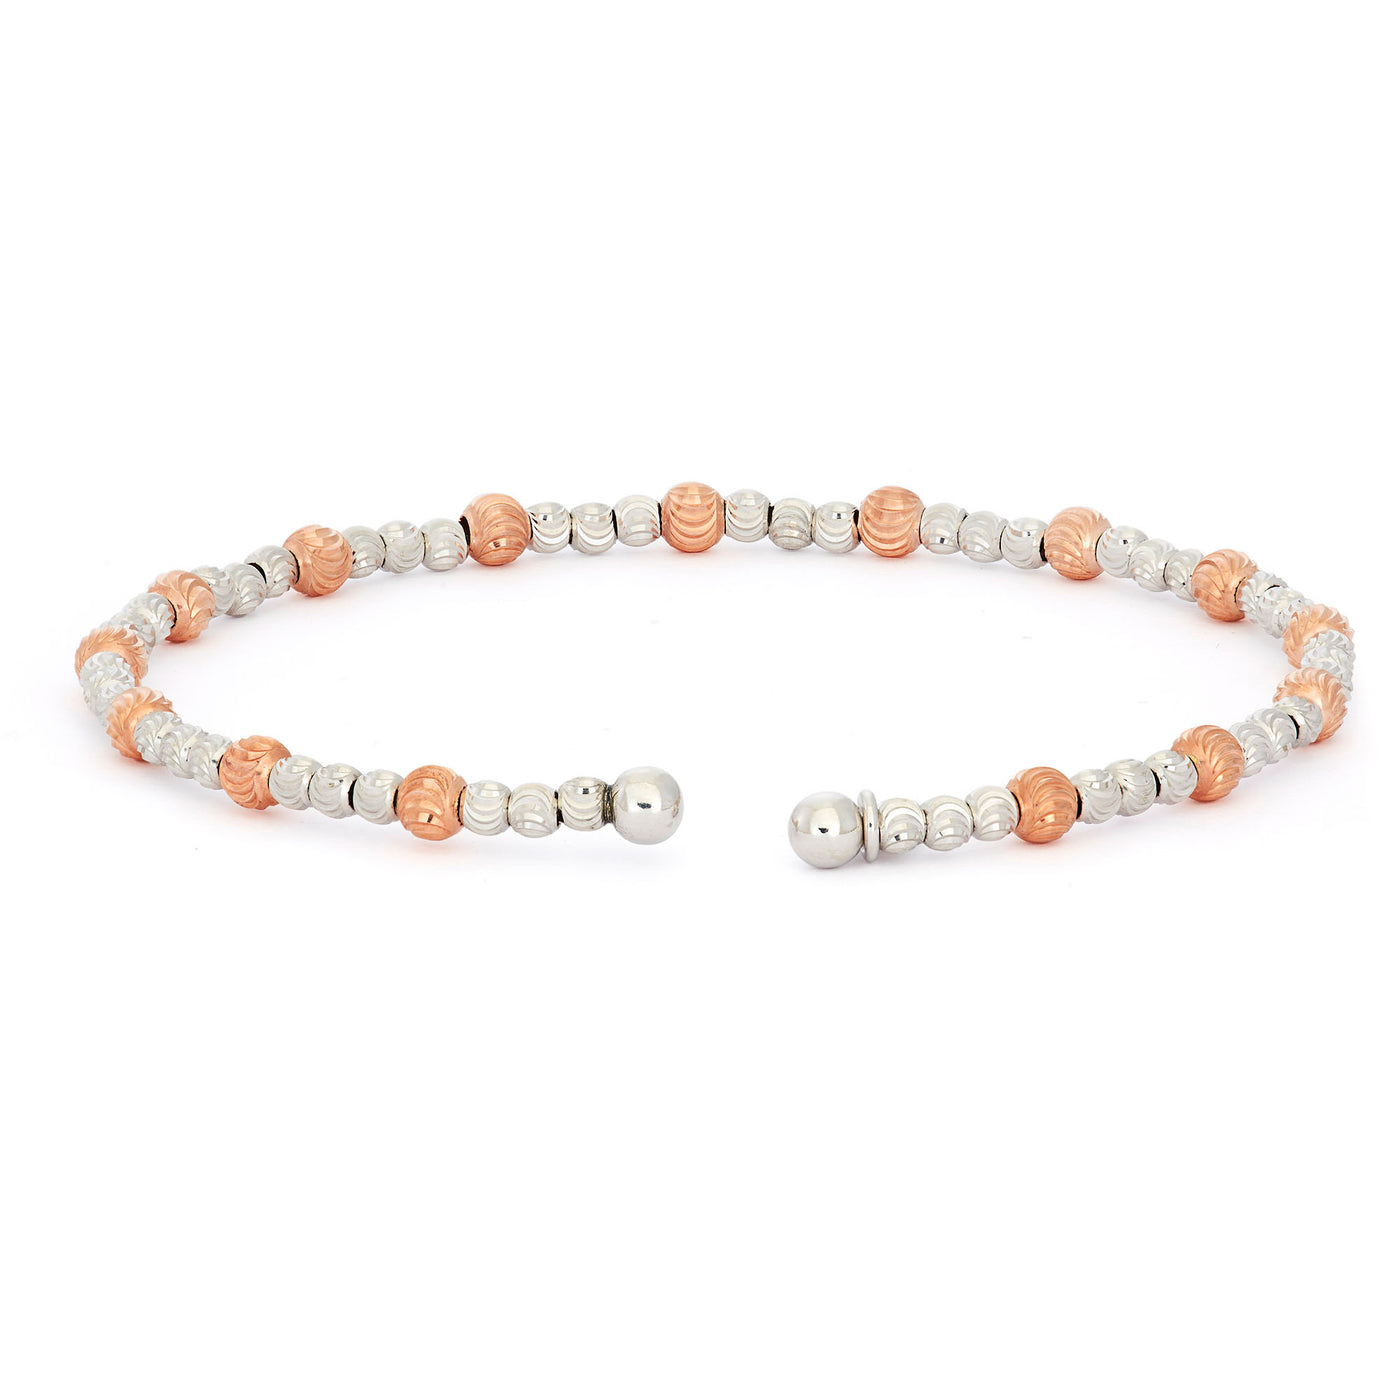 Rebecca Sloane Tri-Color Silver Bracelet With Textured Beads